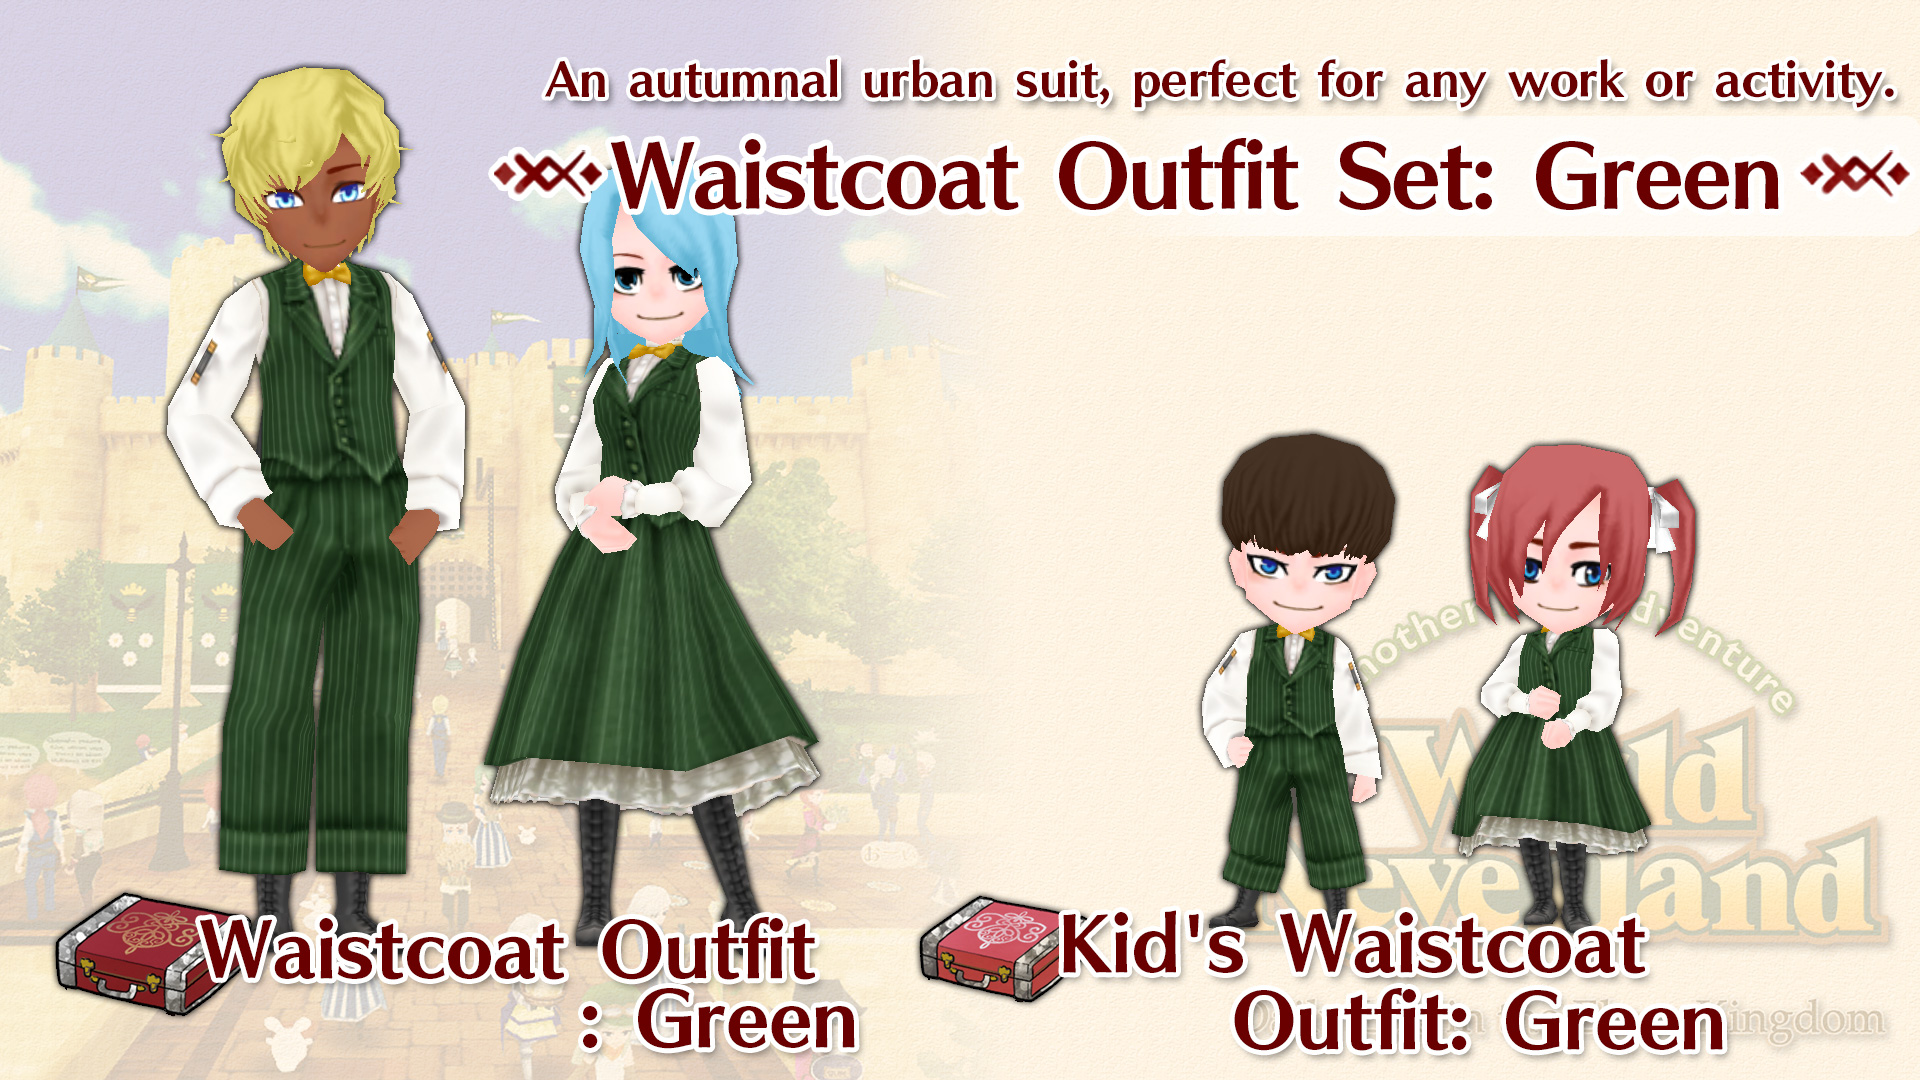 Waistcoat Outfit Set: Green